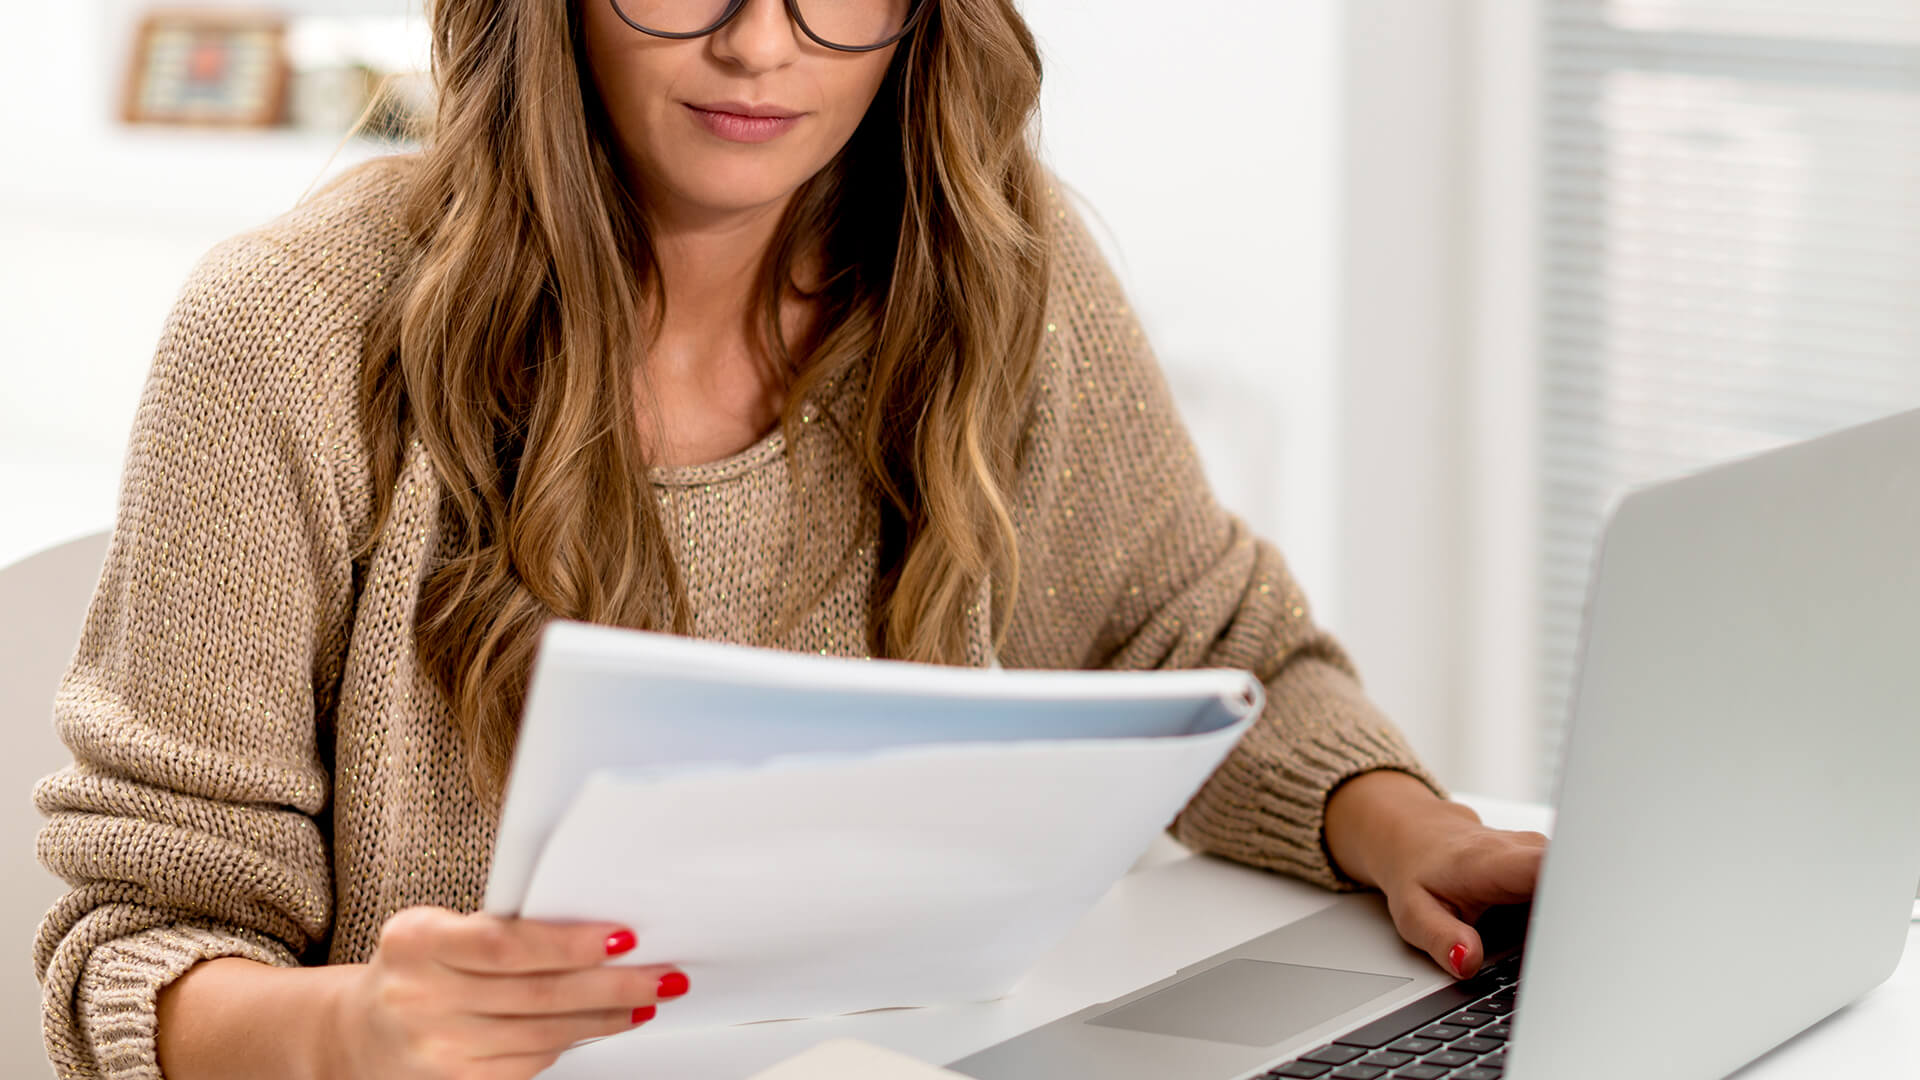 A focused woman with glasses reviews documents beside her laptop in a bright home office.